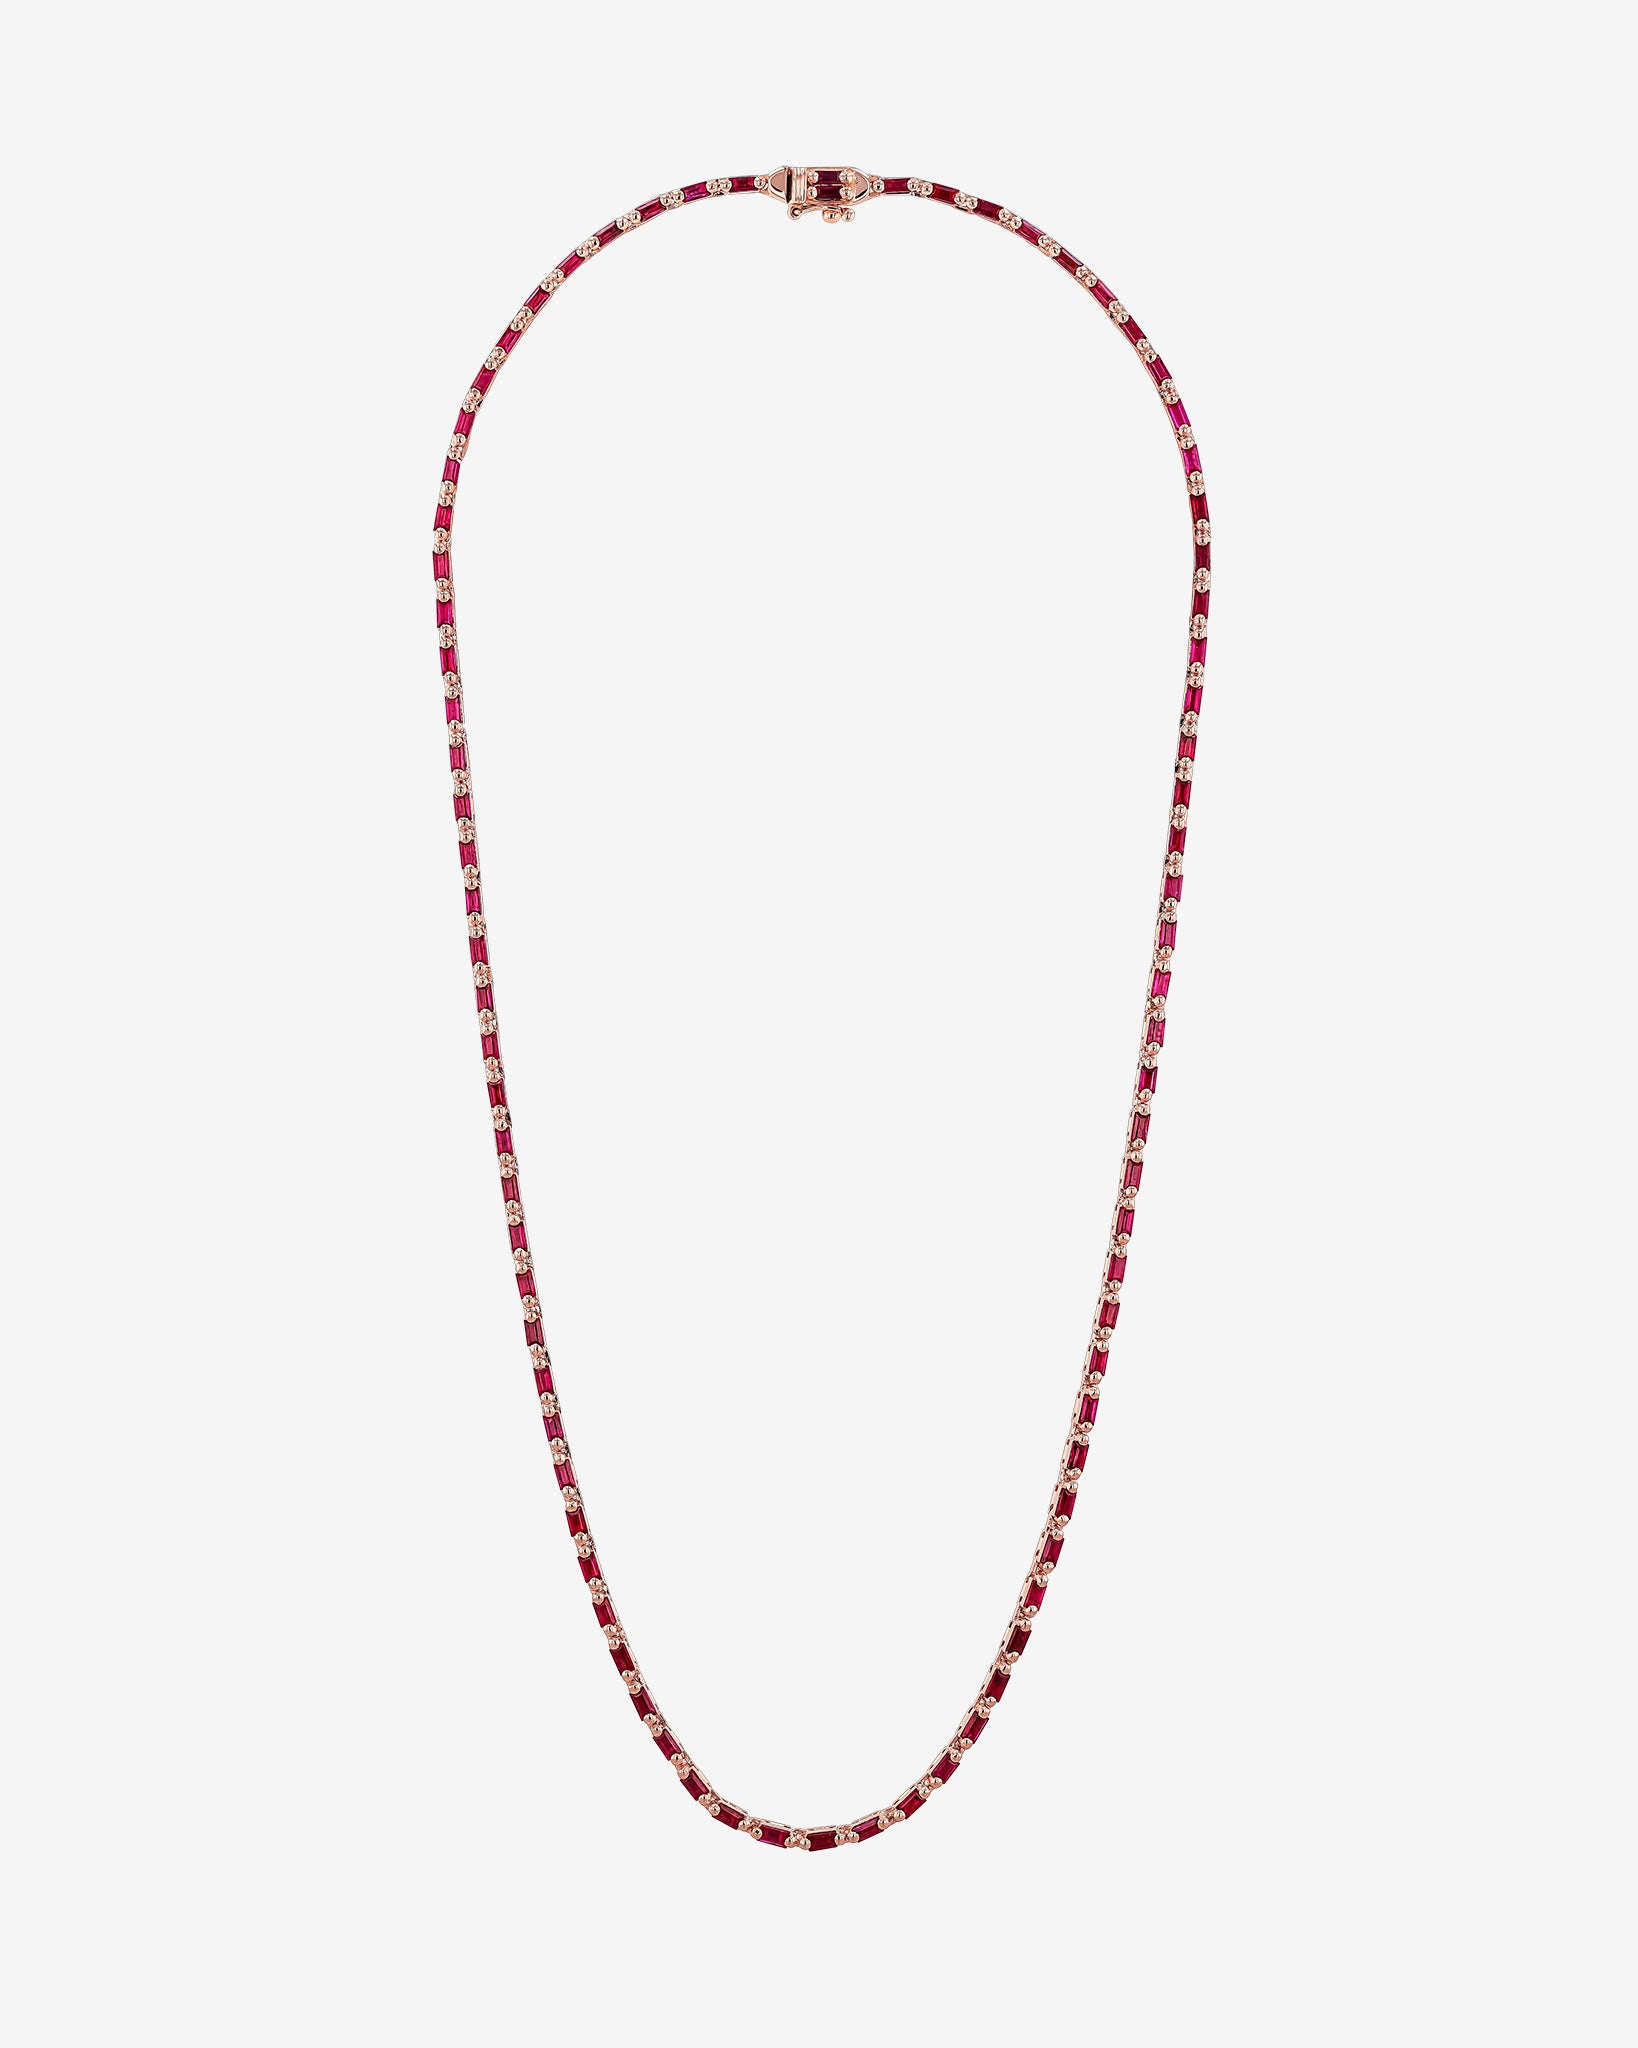 Suzanne Kalan Linear Full Ruby Tennis Necklace in 18k rose gold